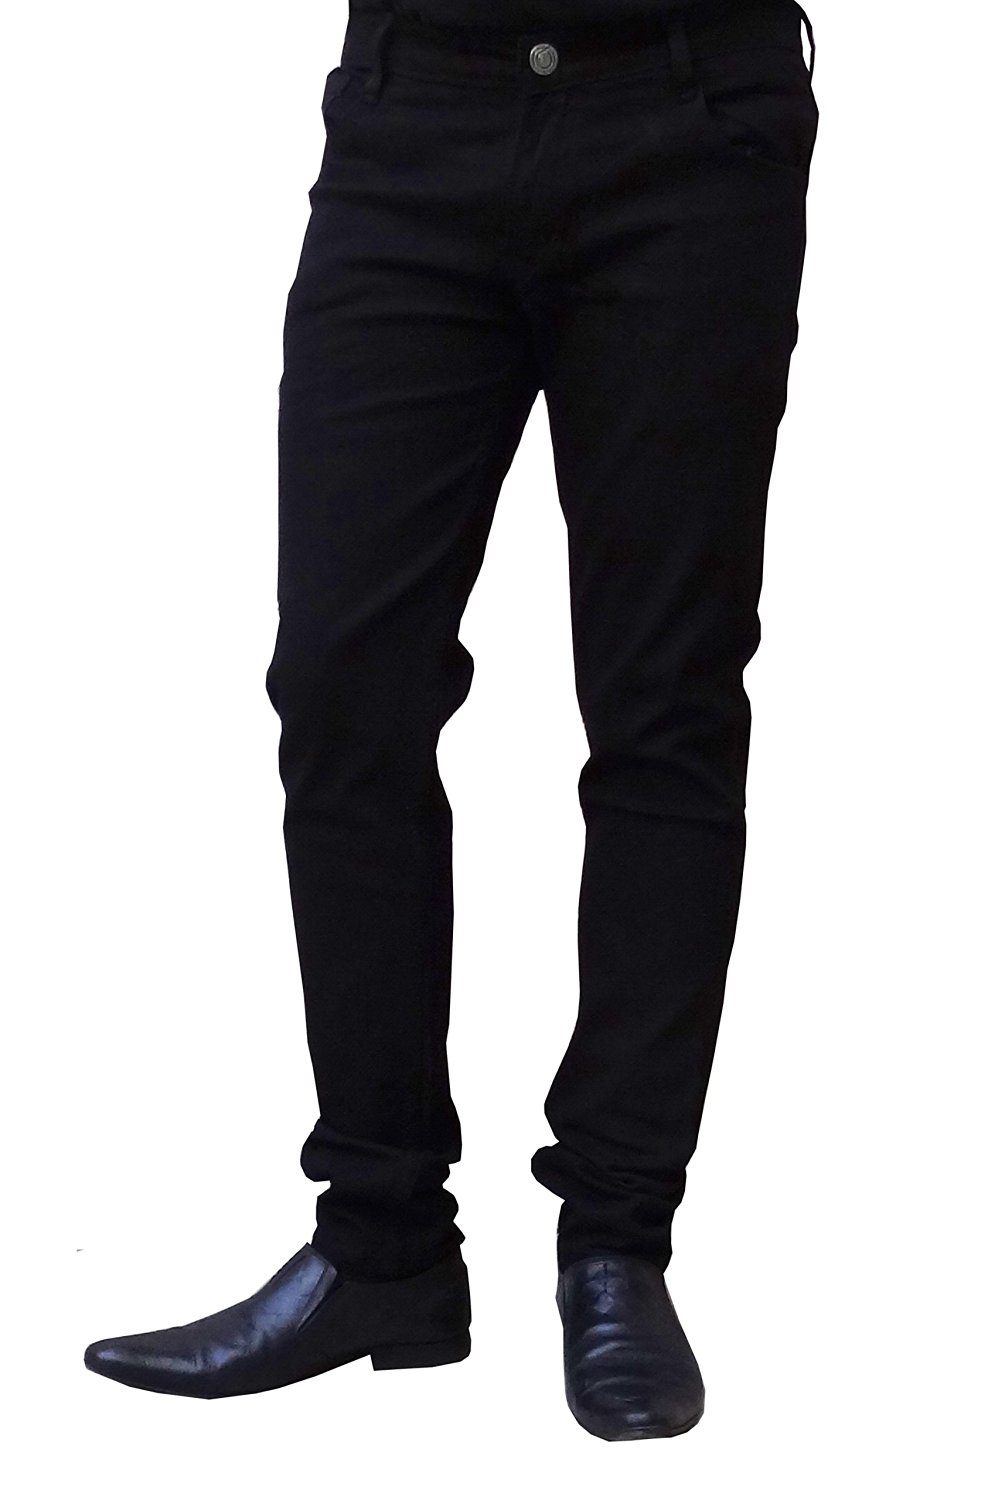 Buy Mens Fahion Slim Fit Black Jeans Online @ ₹1050 from ShopClues